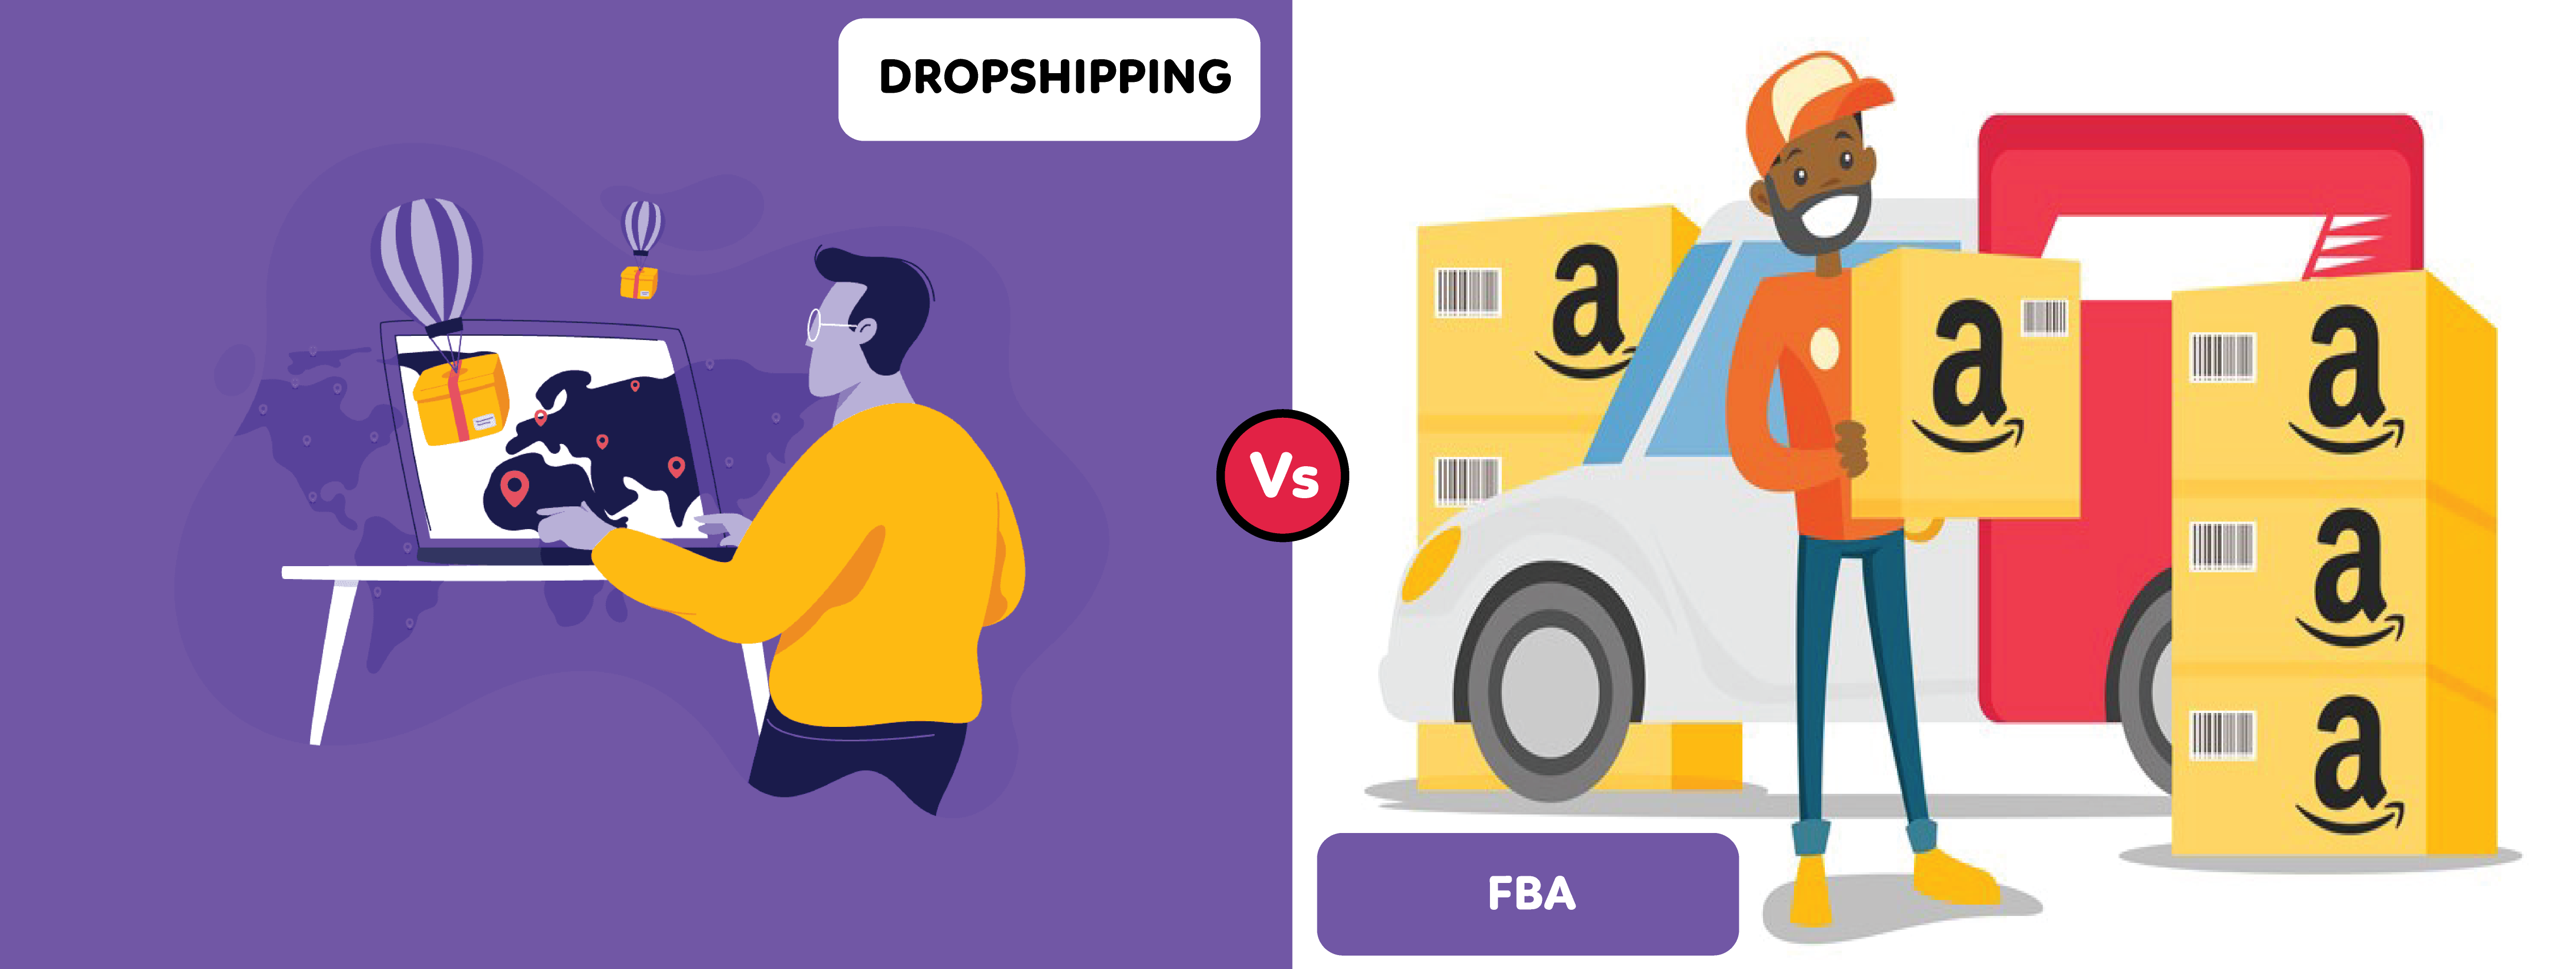 Dropshipping vs FBA 2019 - Which One is Better Starting Out? 1